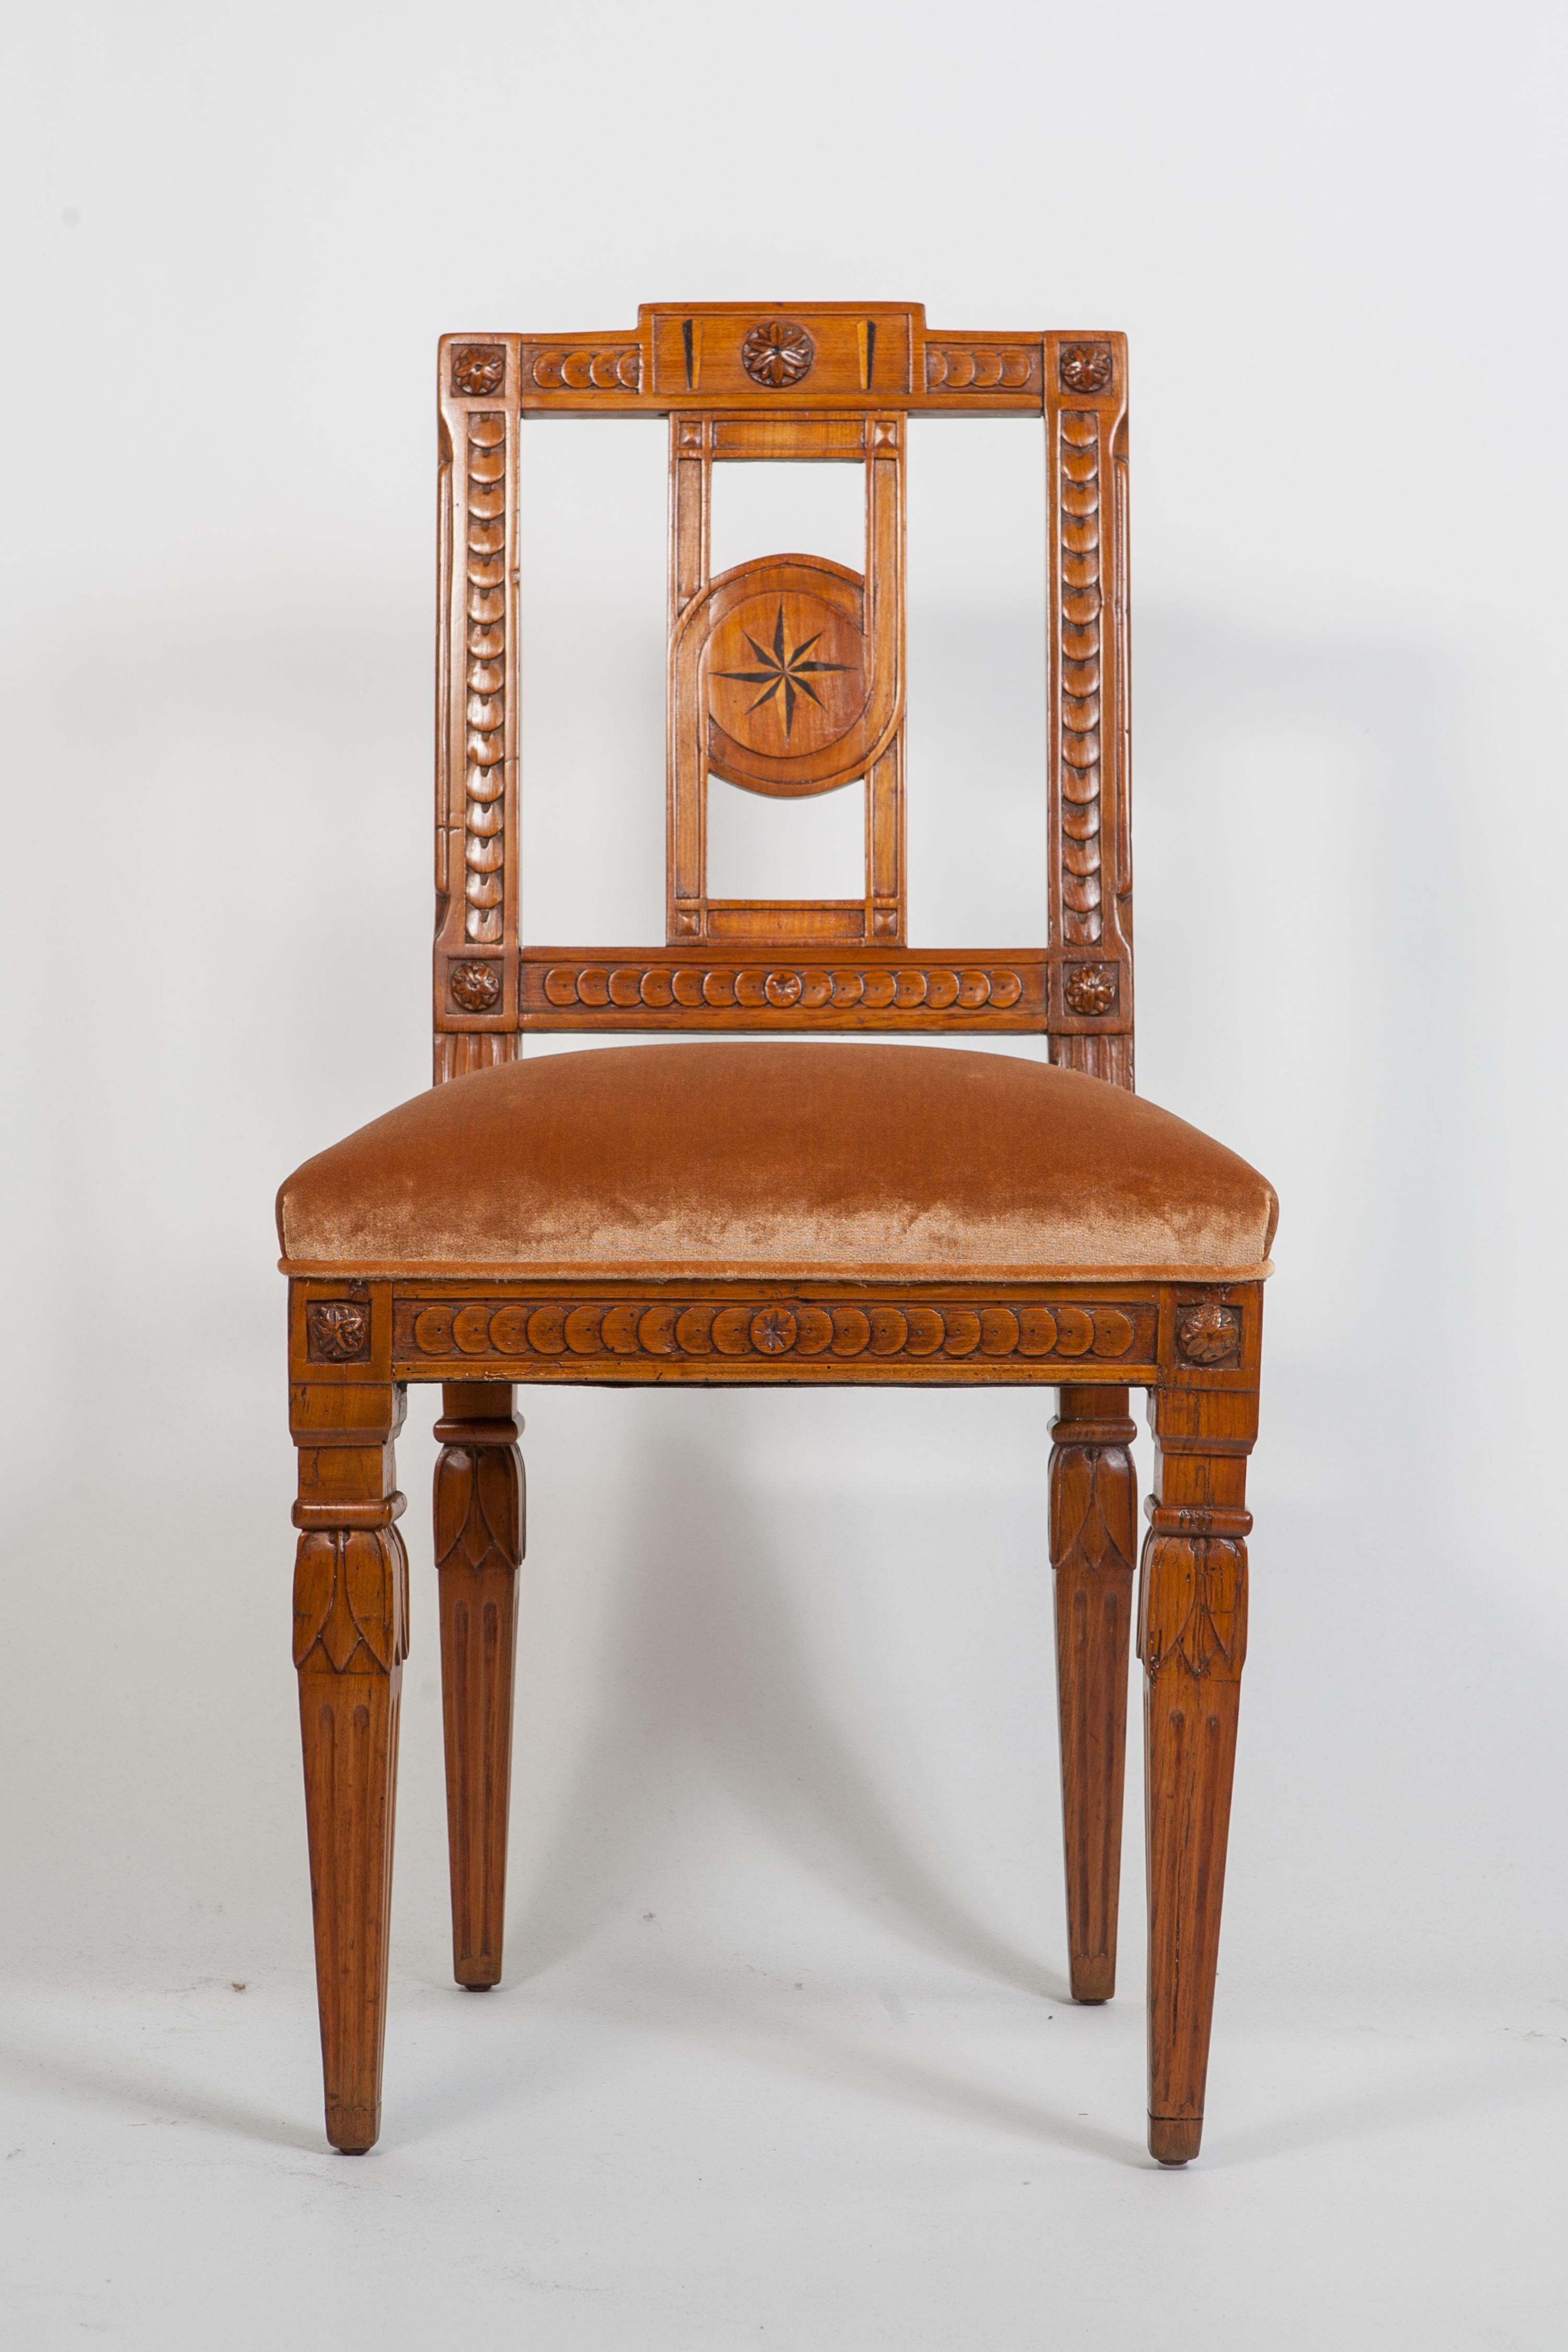 Beautiful pair of carved and inlaid fruitwood Italian neoclassical side chairs with carved wood details throughout and tapered legs. Newly upholstered in caramel silk velvet.